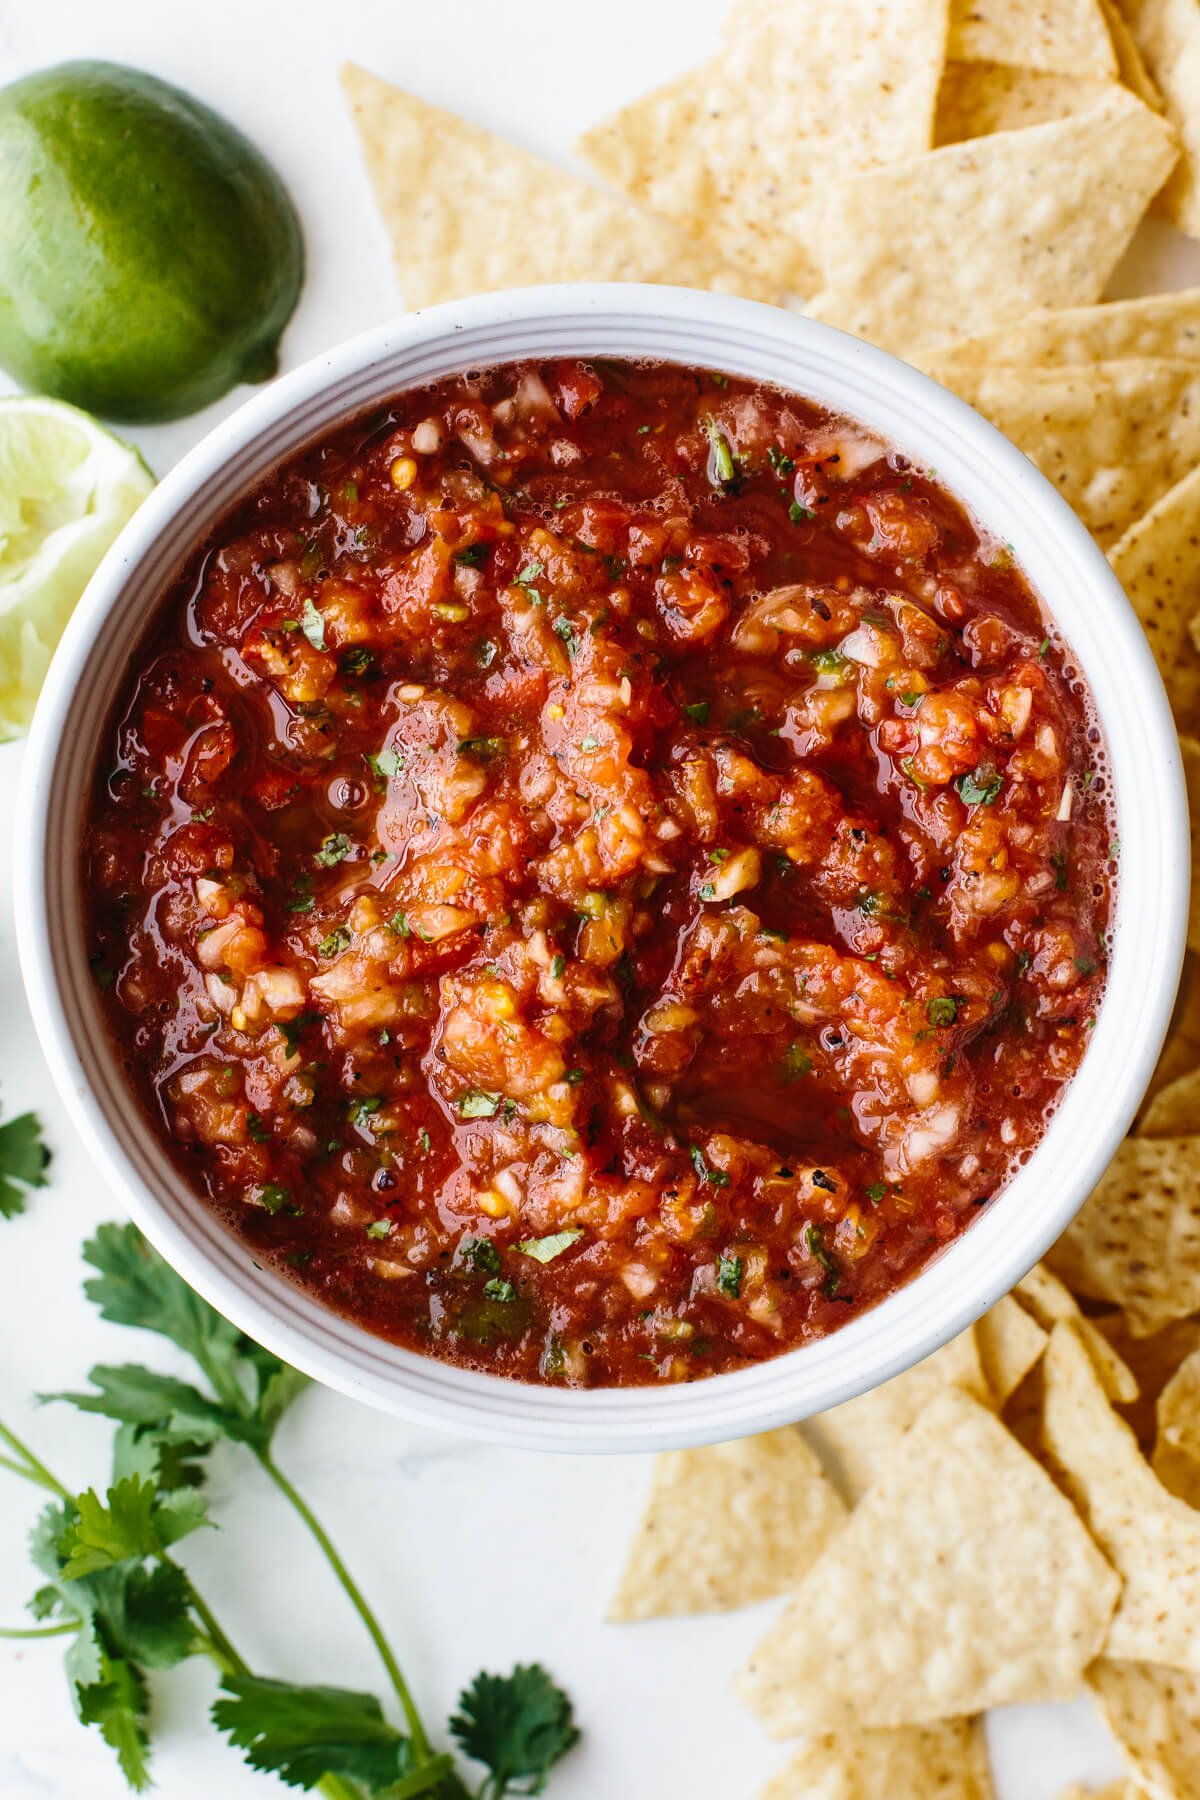 Salsa recipe in a bowl surrounded by chips, limes and cilantro.